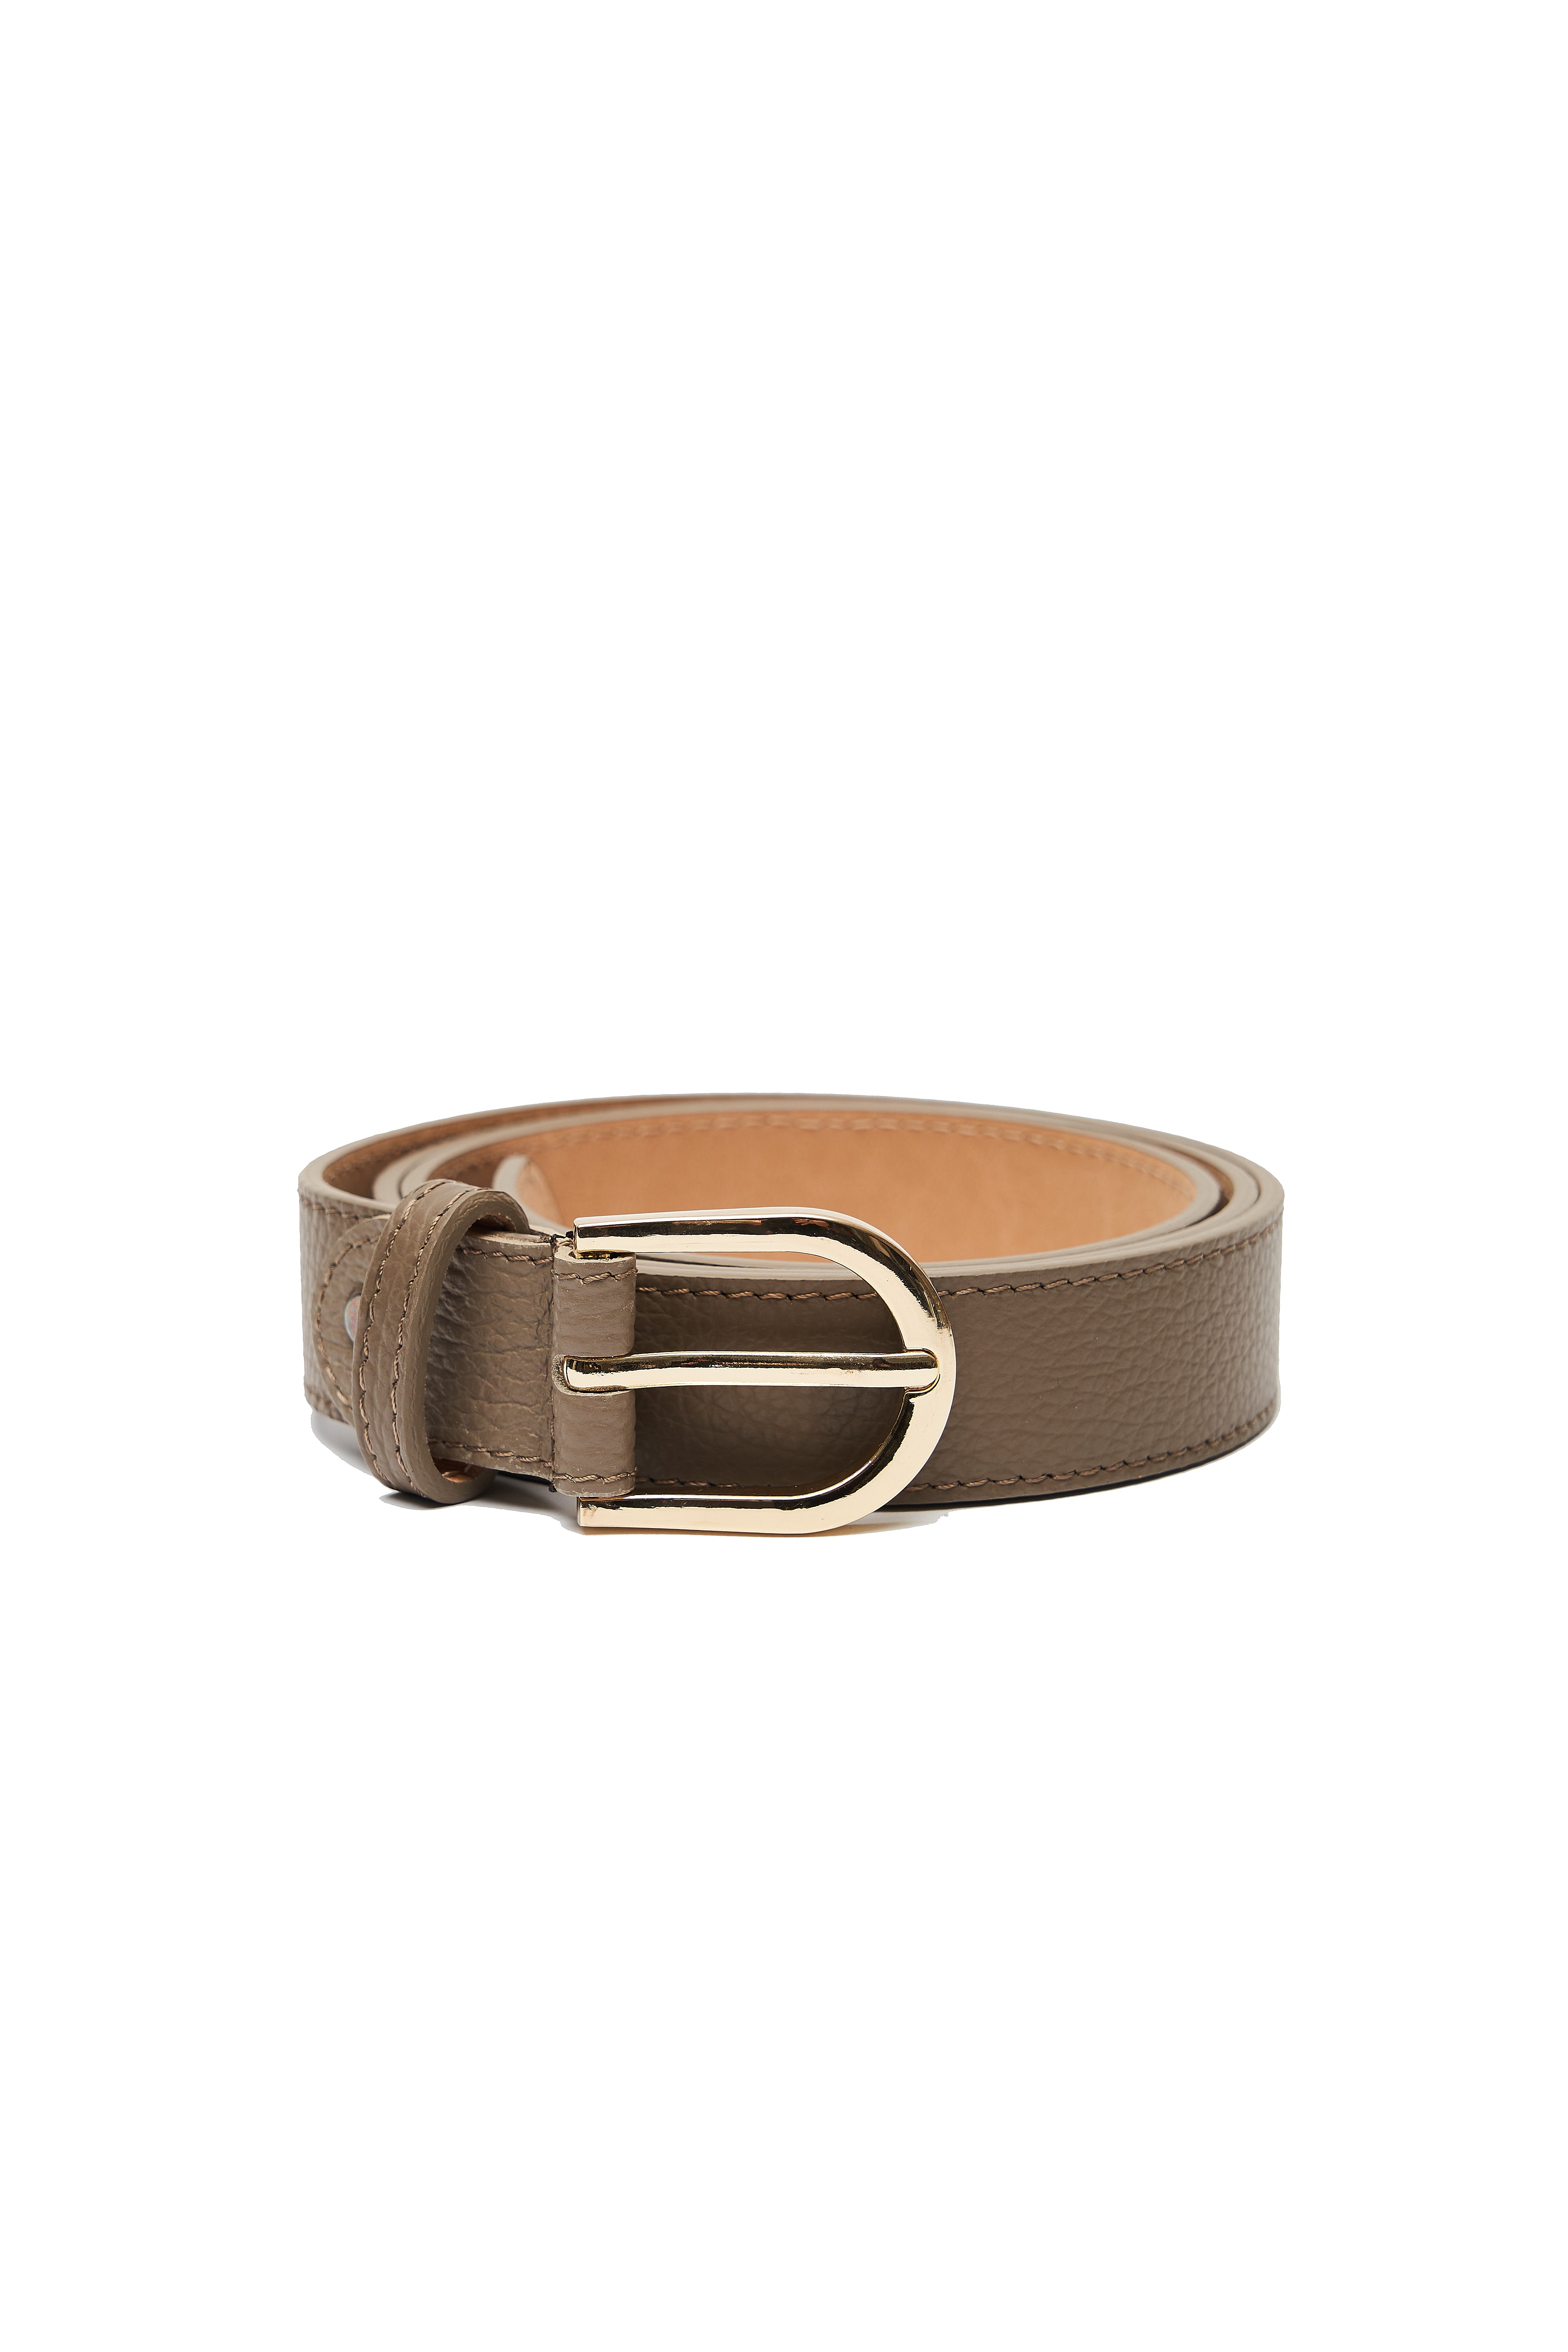 LEATHER CACAO BELT WITH GOLDEN DETAILS